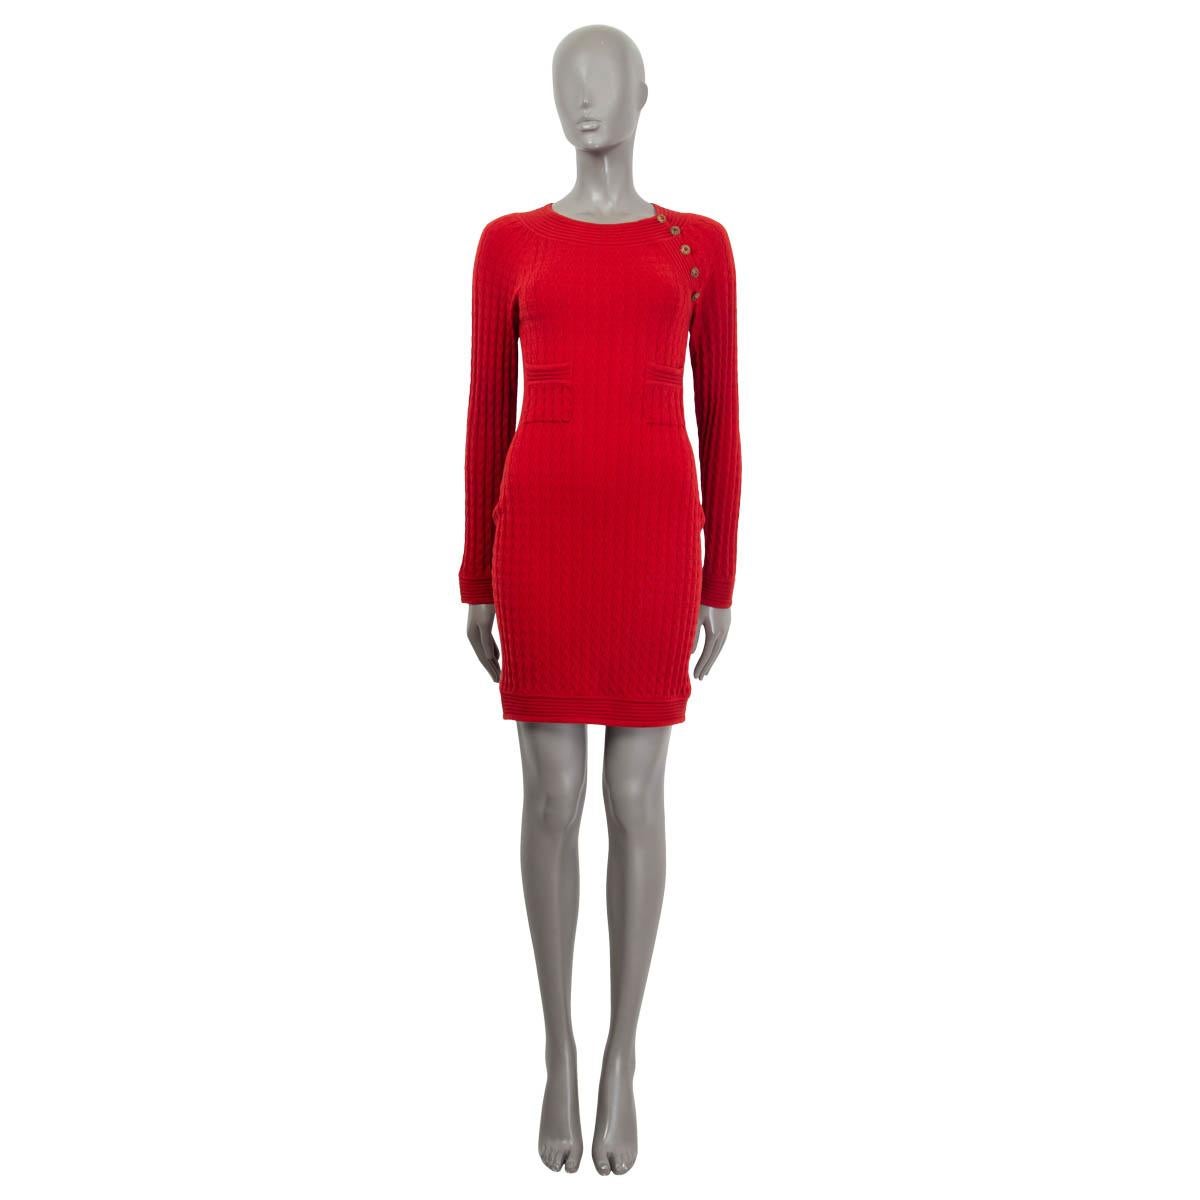 100% authentic Chanel Metiers D'Art 2010 Paris-Shanghai knit dress in red wool (87%) and polyester (13%). Features two patch pockets on the front and long raglan sleeves (sleeve measurements taken from the neck). Opens with five 'CC' buttons on the